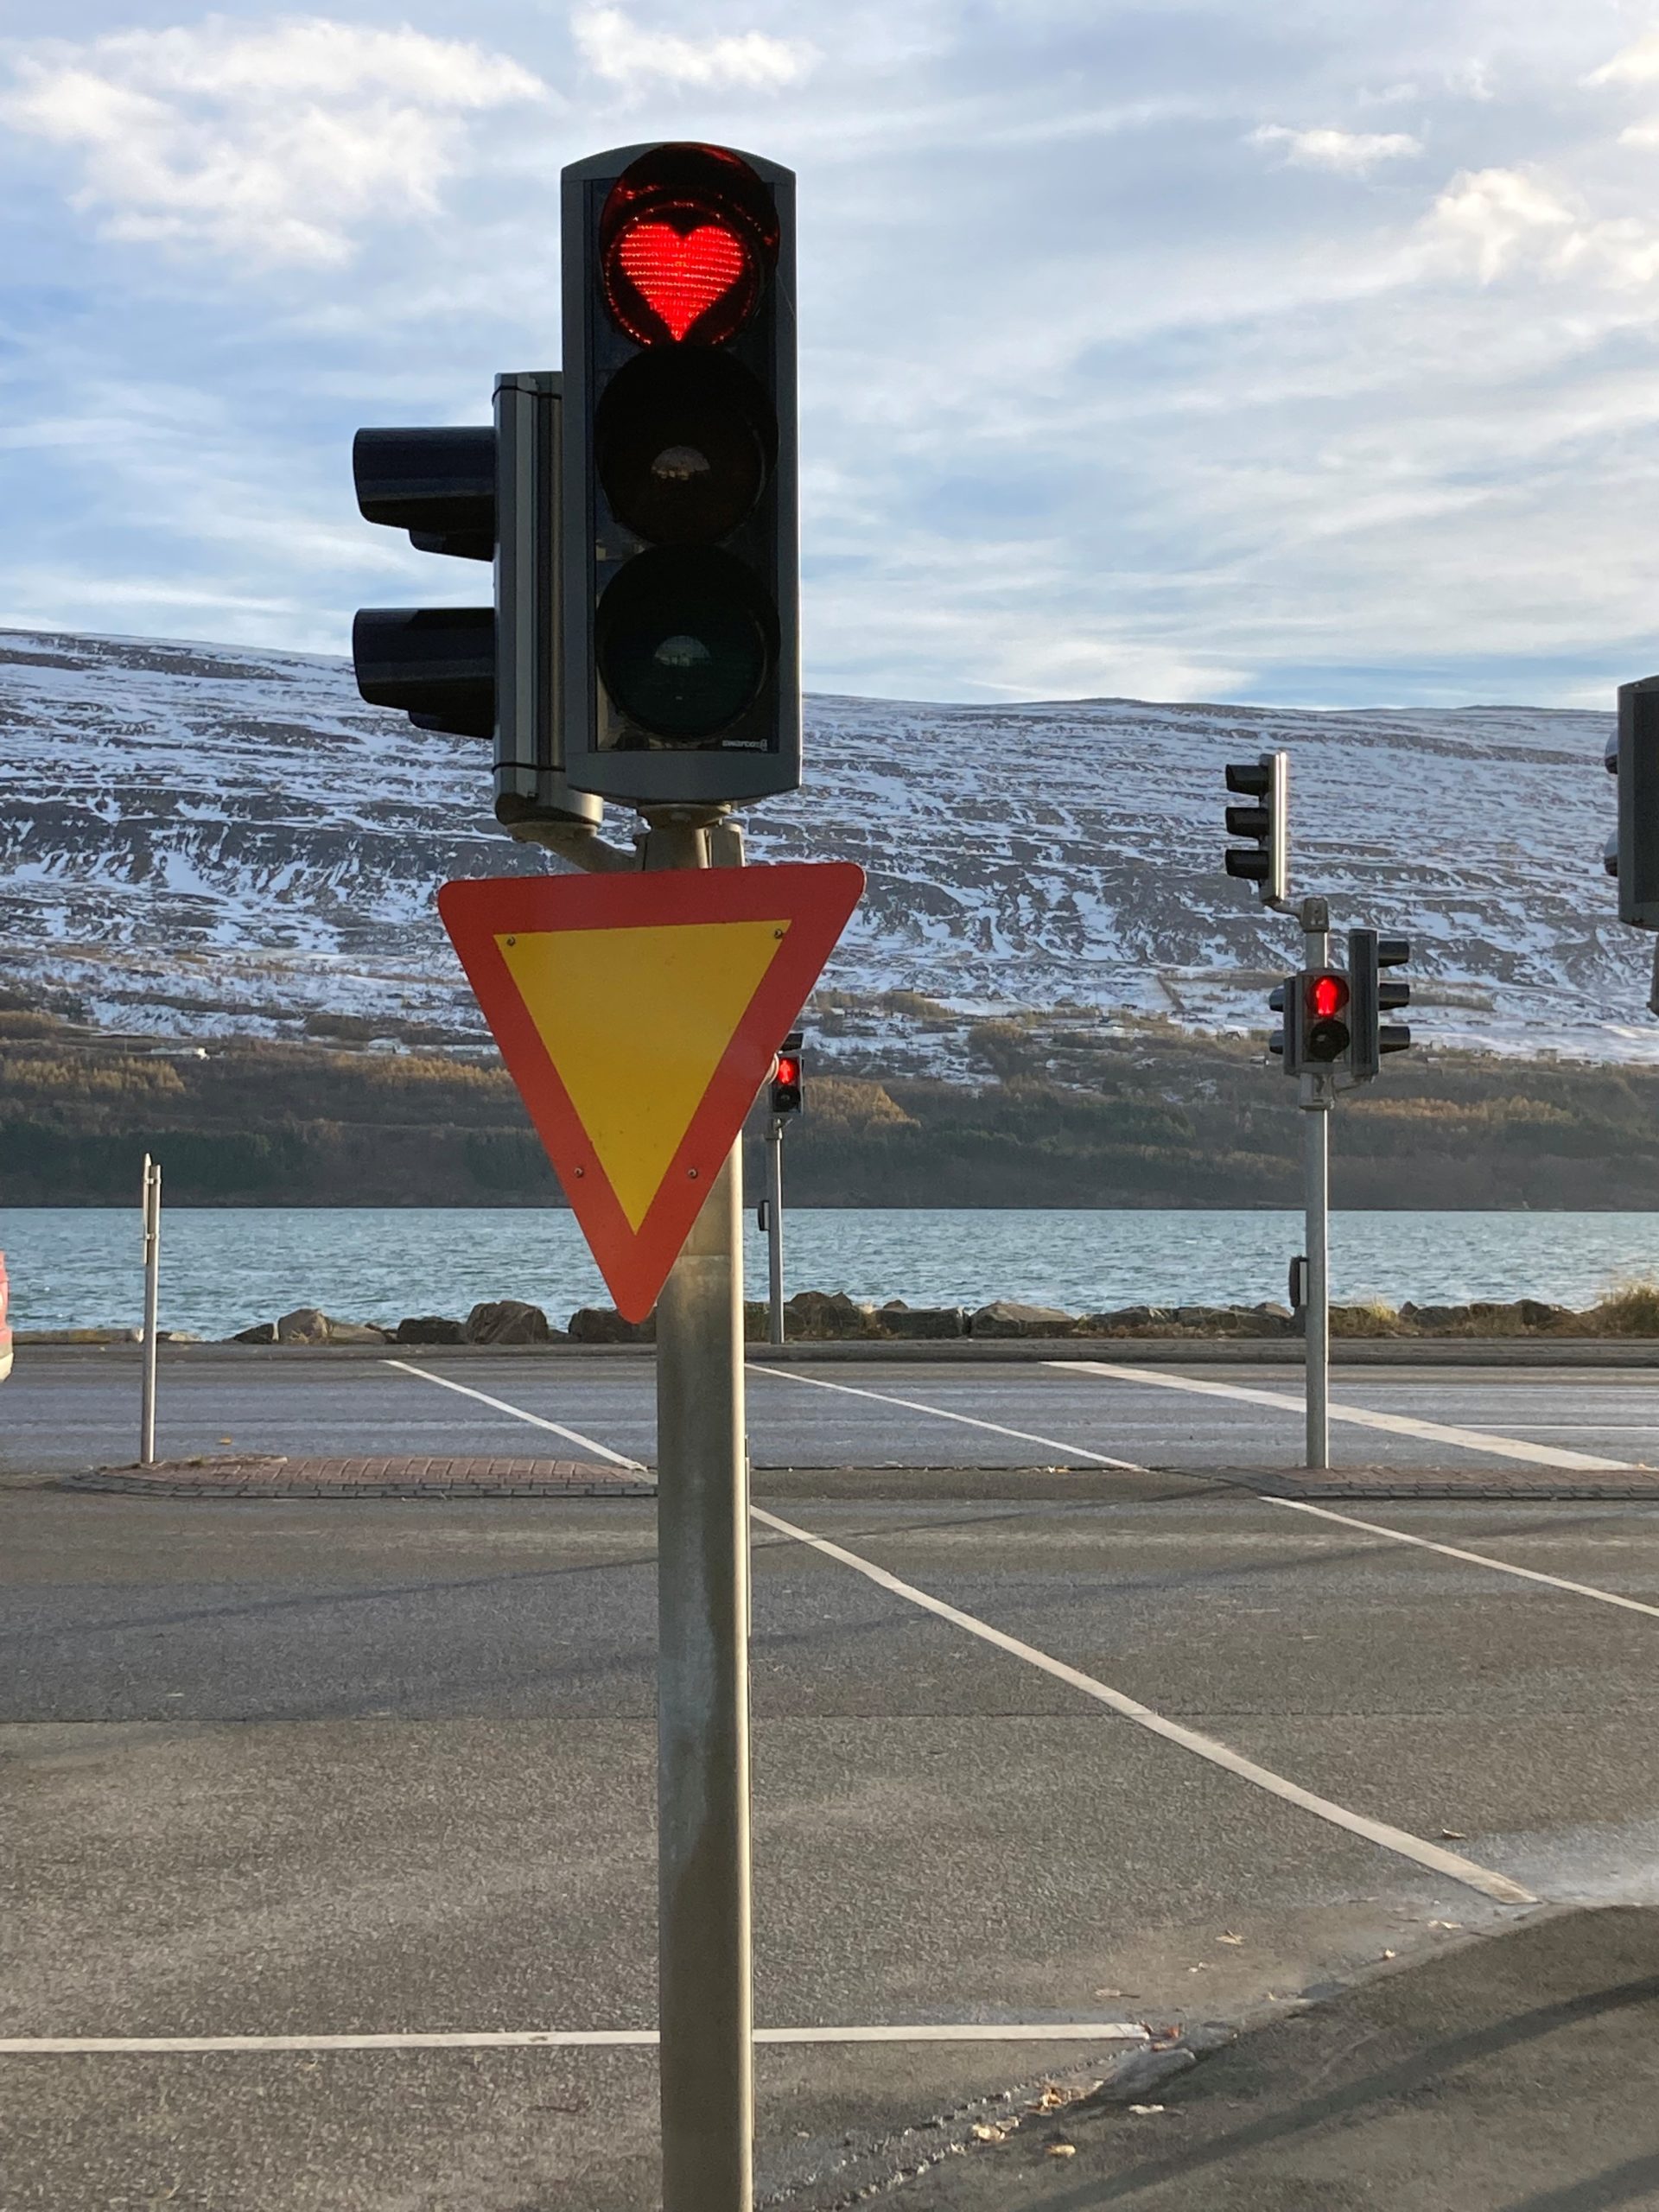 Photo: the red traffic lights in Akureyri are shaped like a heart since the financial crisis in 2008/2009